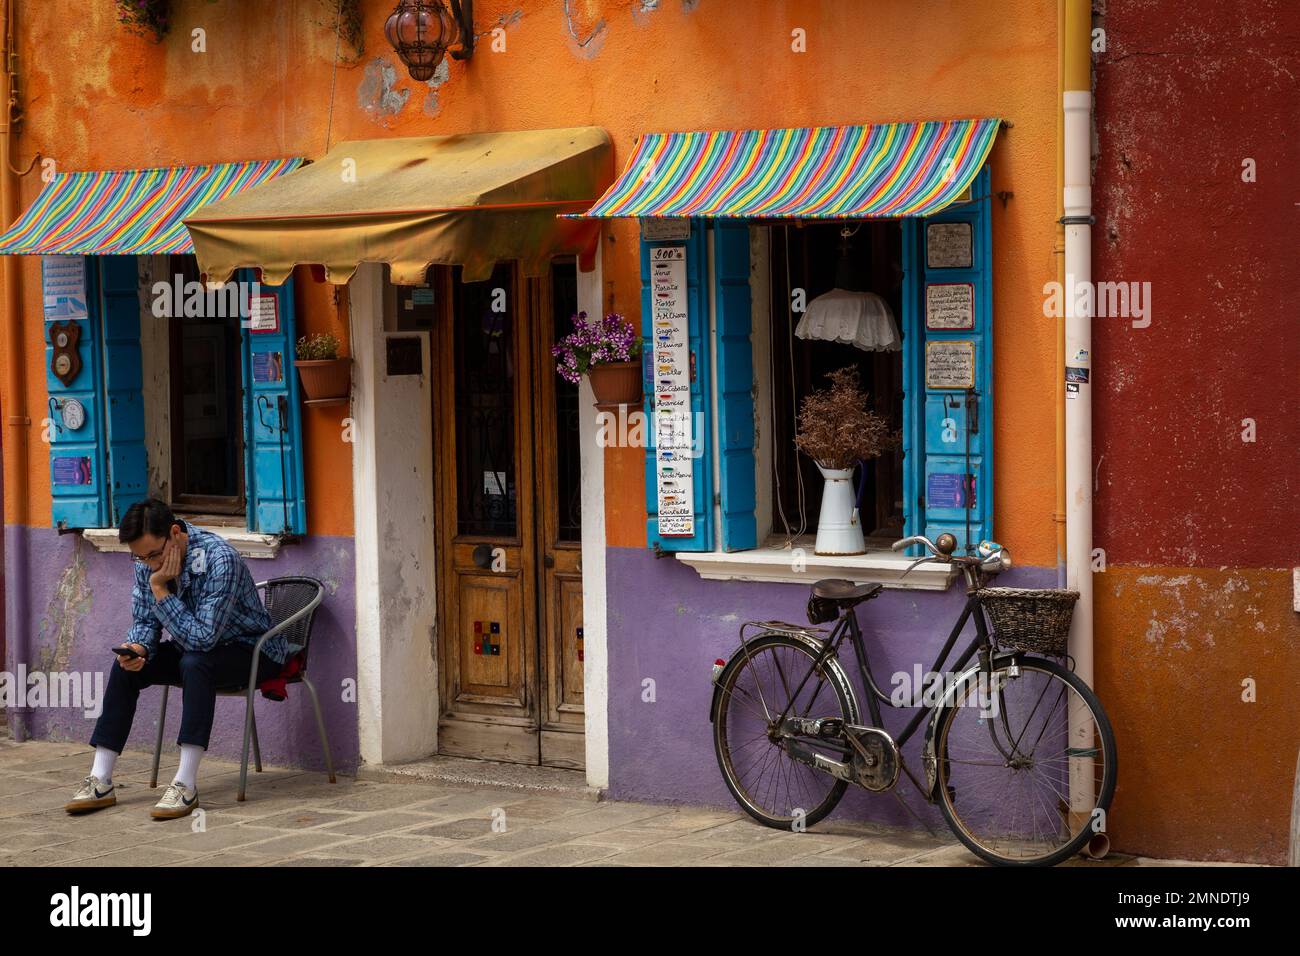 A Young man rests outside of a brightly painted shop on Burano, searching his phone, a bicycle is leant against the wall Stock Photo